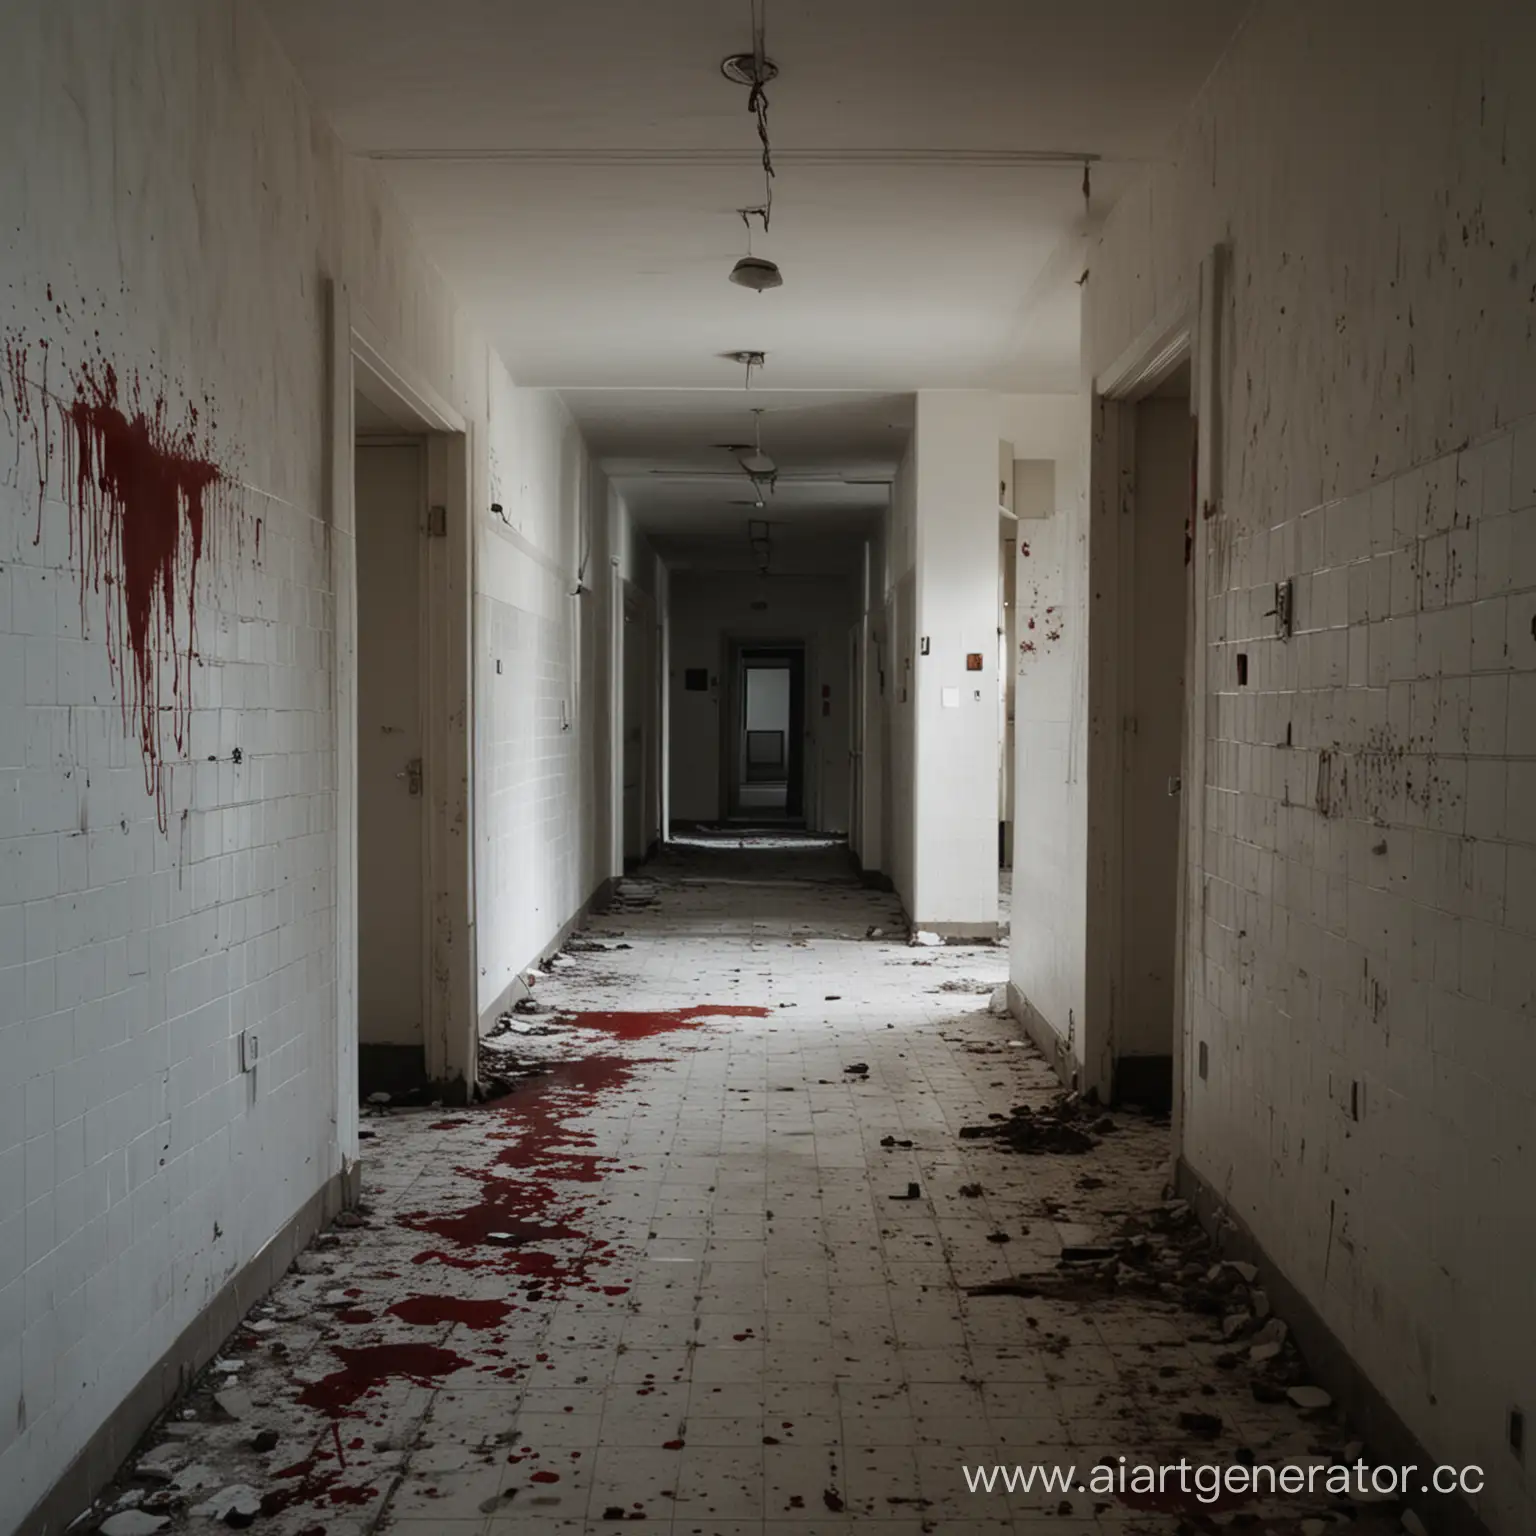 Eerie-Abandoned-Hospital-Corridors-White-Tiles-Darkness-and-Blood-Splatters